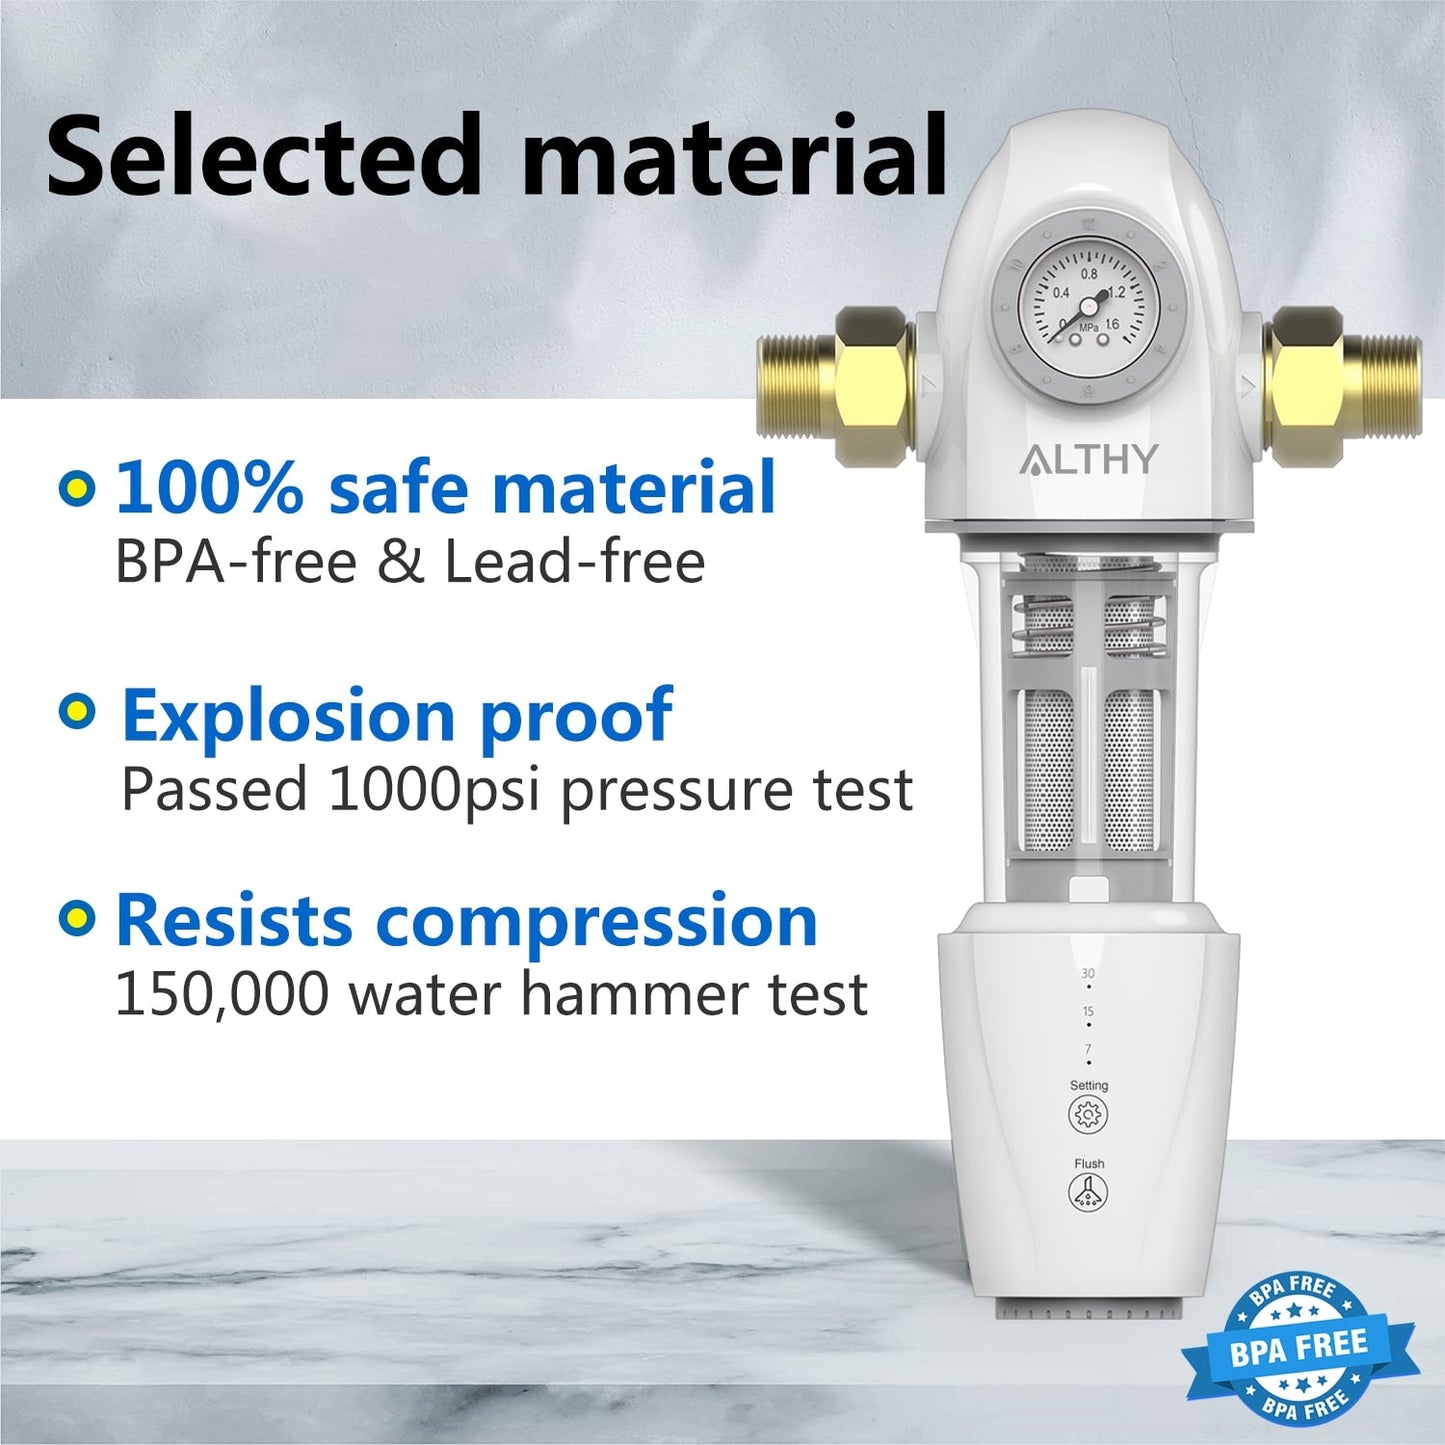 ALTHY PRE-AUTO2 Automatic Flushing Backwash Prefilter Spin Down Sediment Water Filter Central Whole House Purifier System